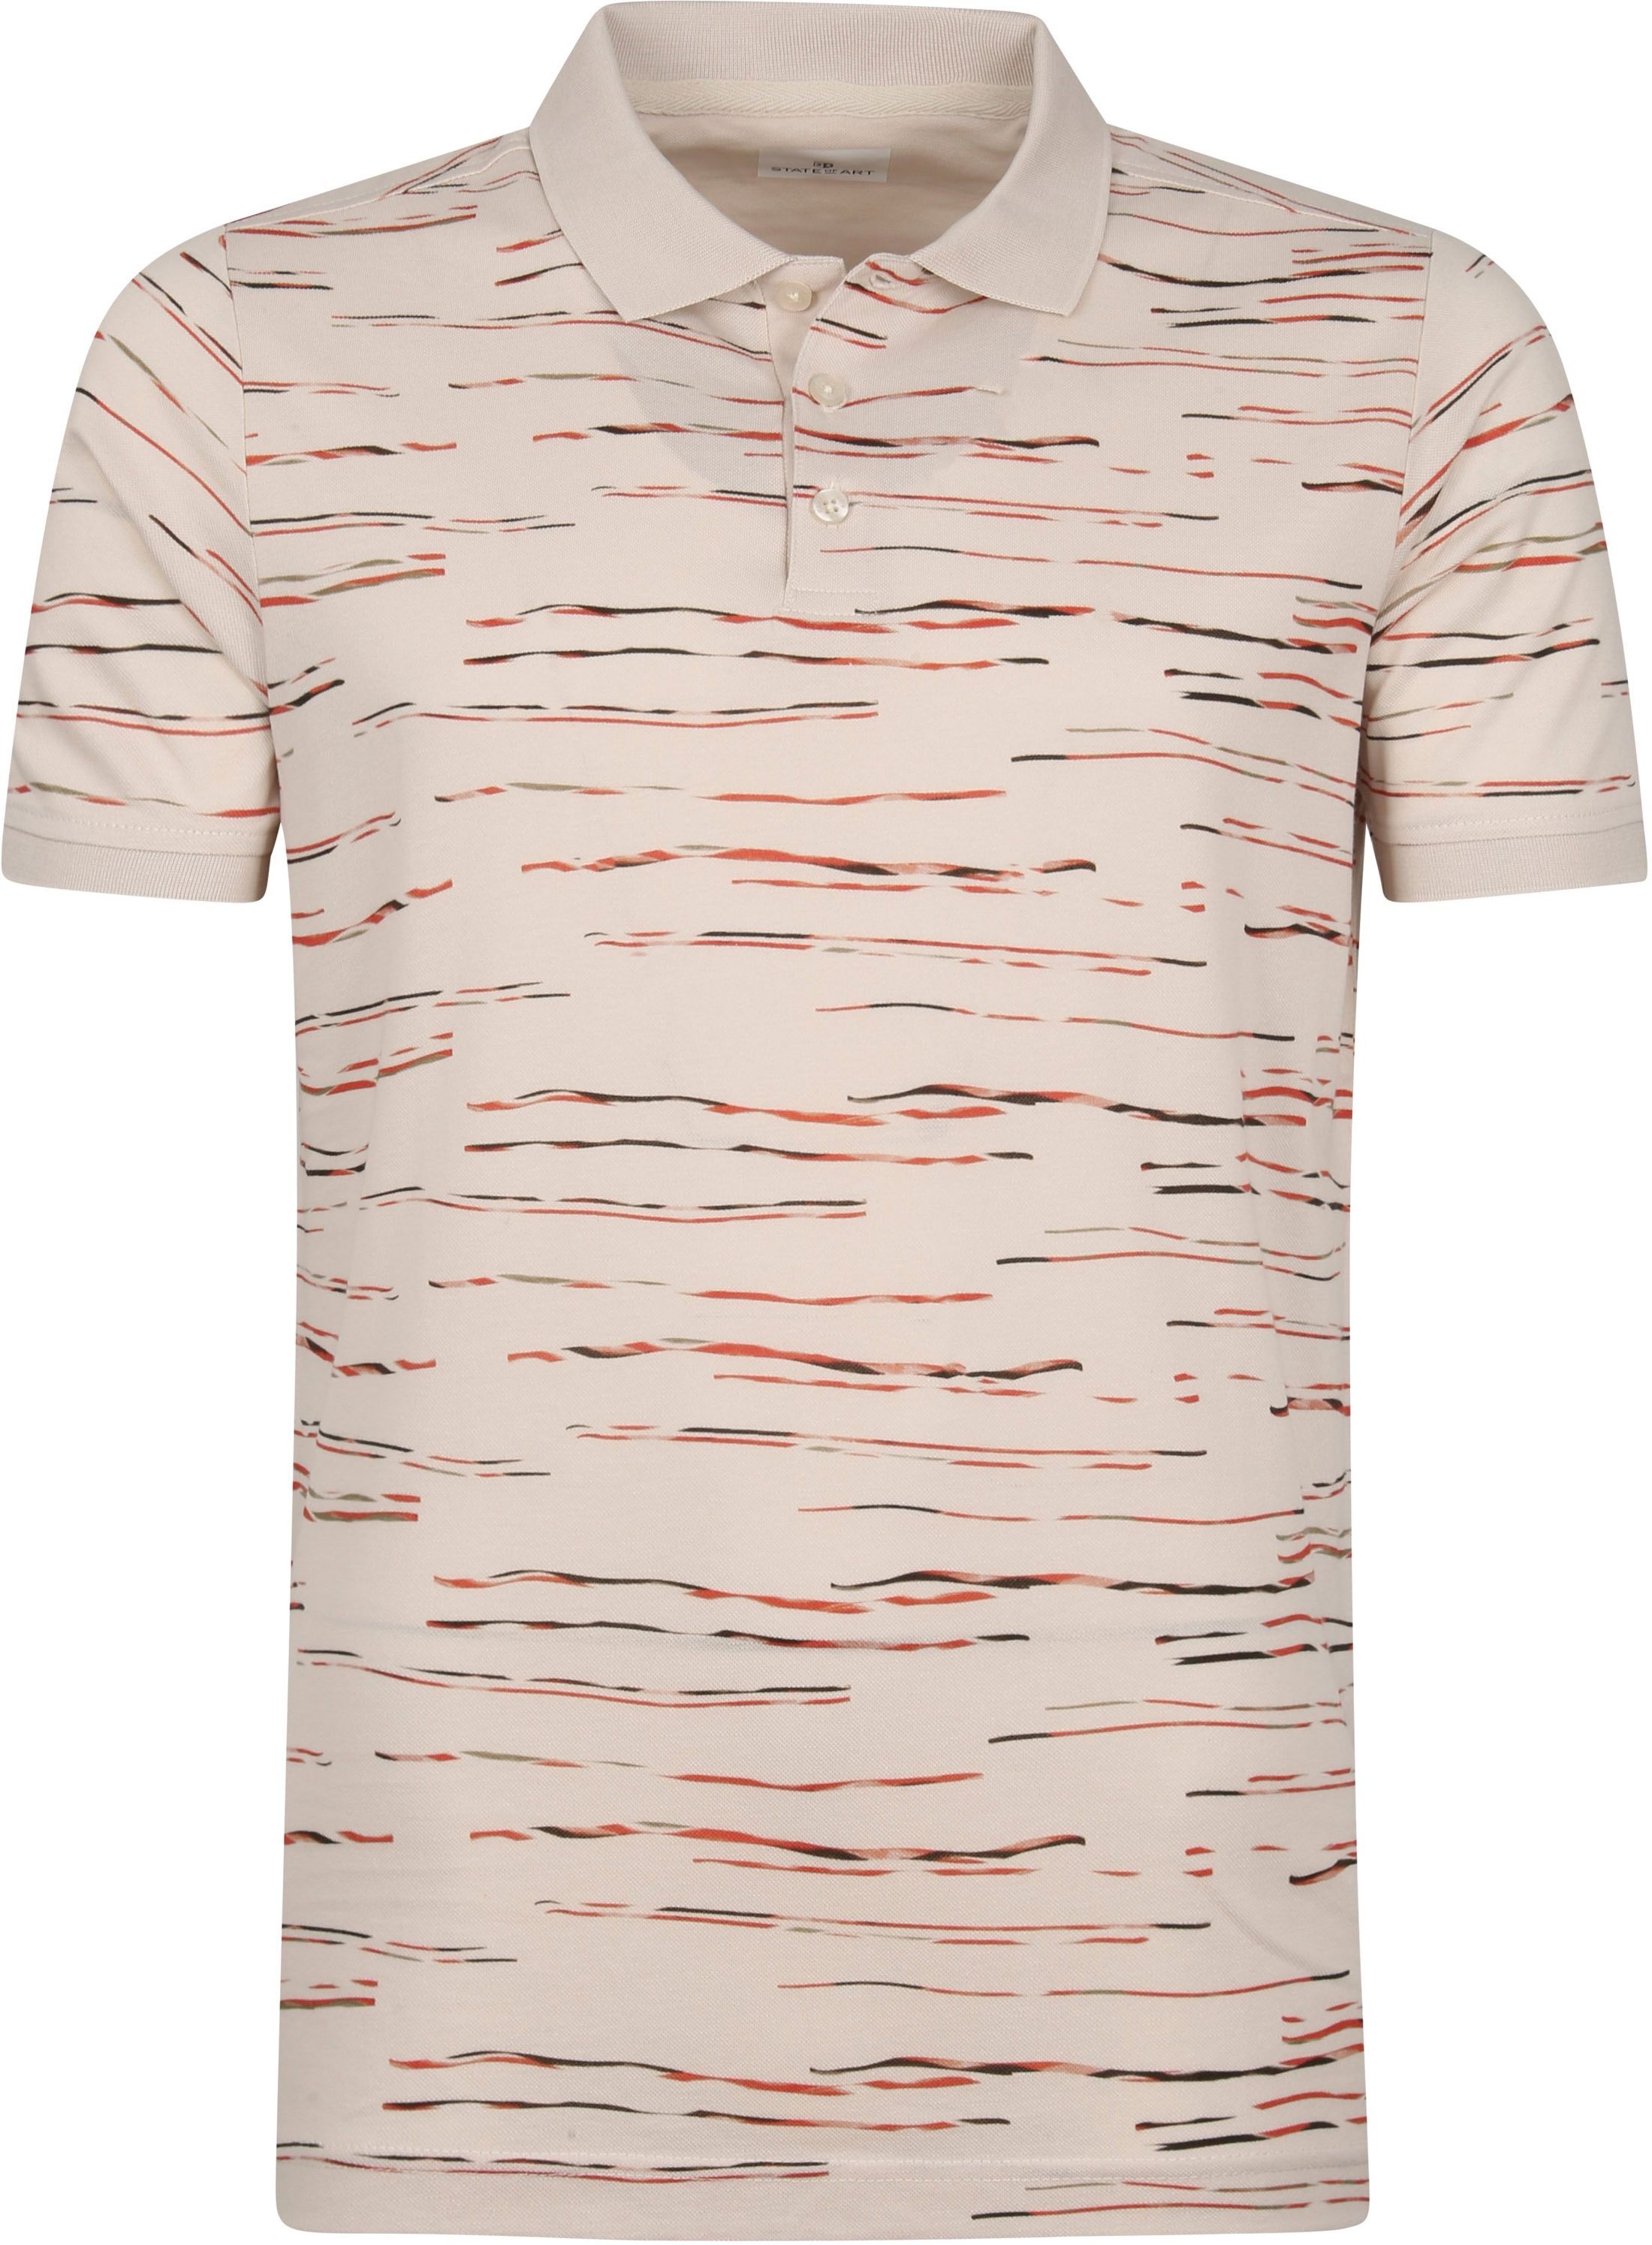 State Of Art Polo Print Beige size 3XL